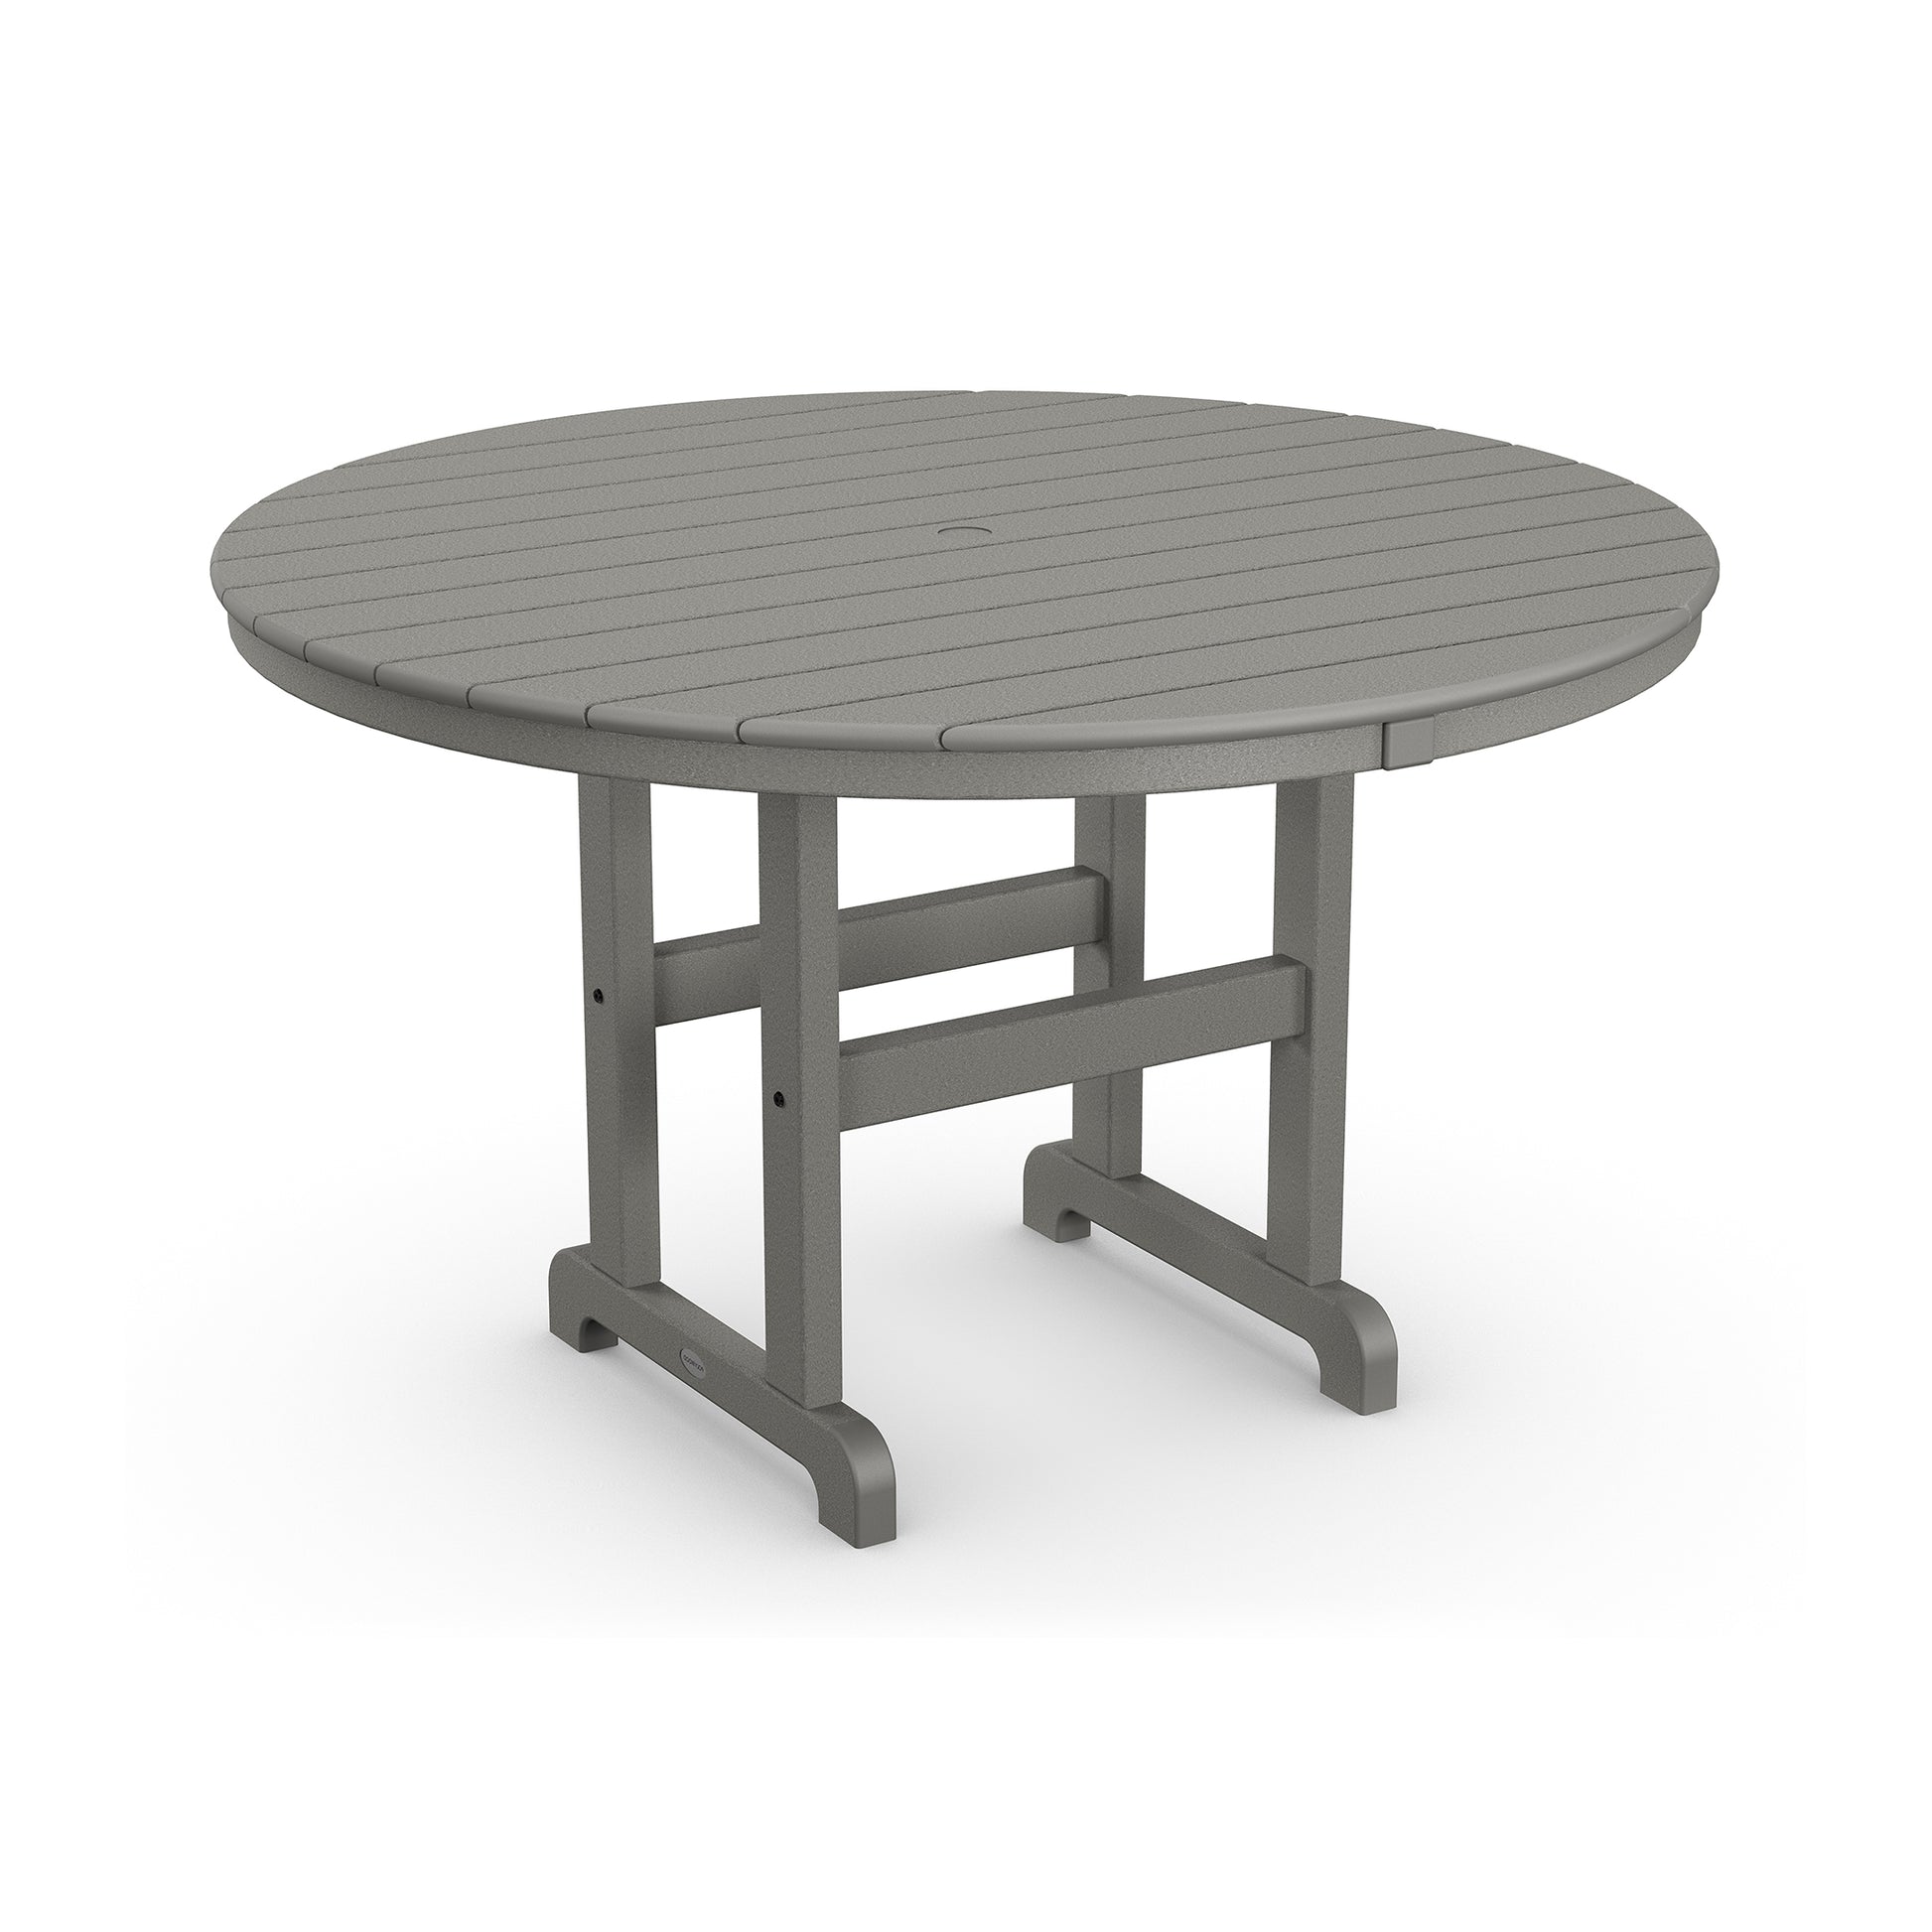 A round, gray POLYWOOD® Outdoor 48" Round Dining Table made of planks with a sturdy four-legged base, shown on a white background.